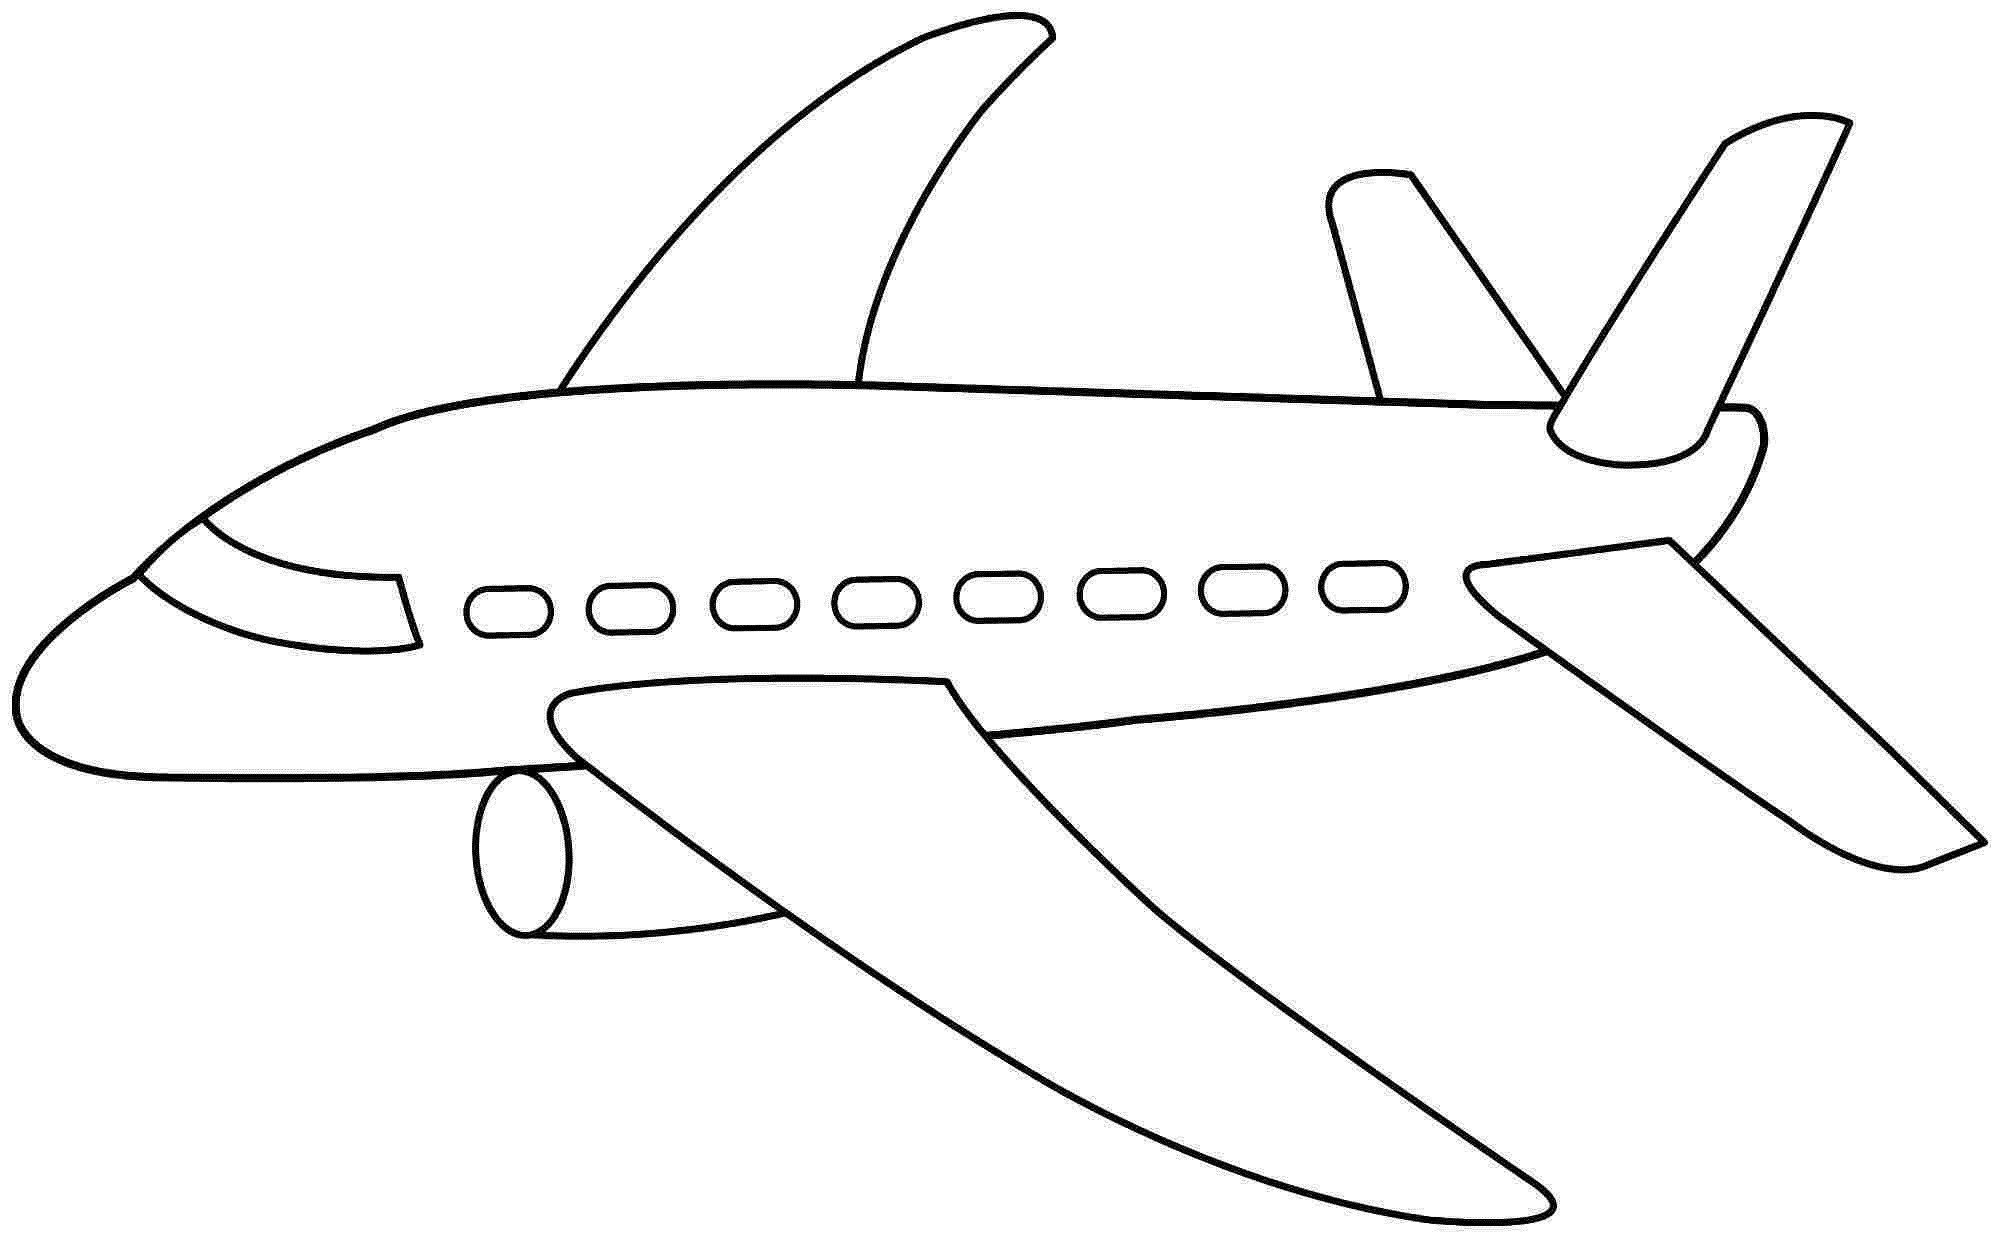 Printable Coloring Pages Airplanes
 Airplane Coloring Pages for Kids Printable